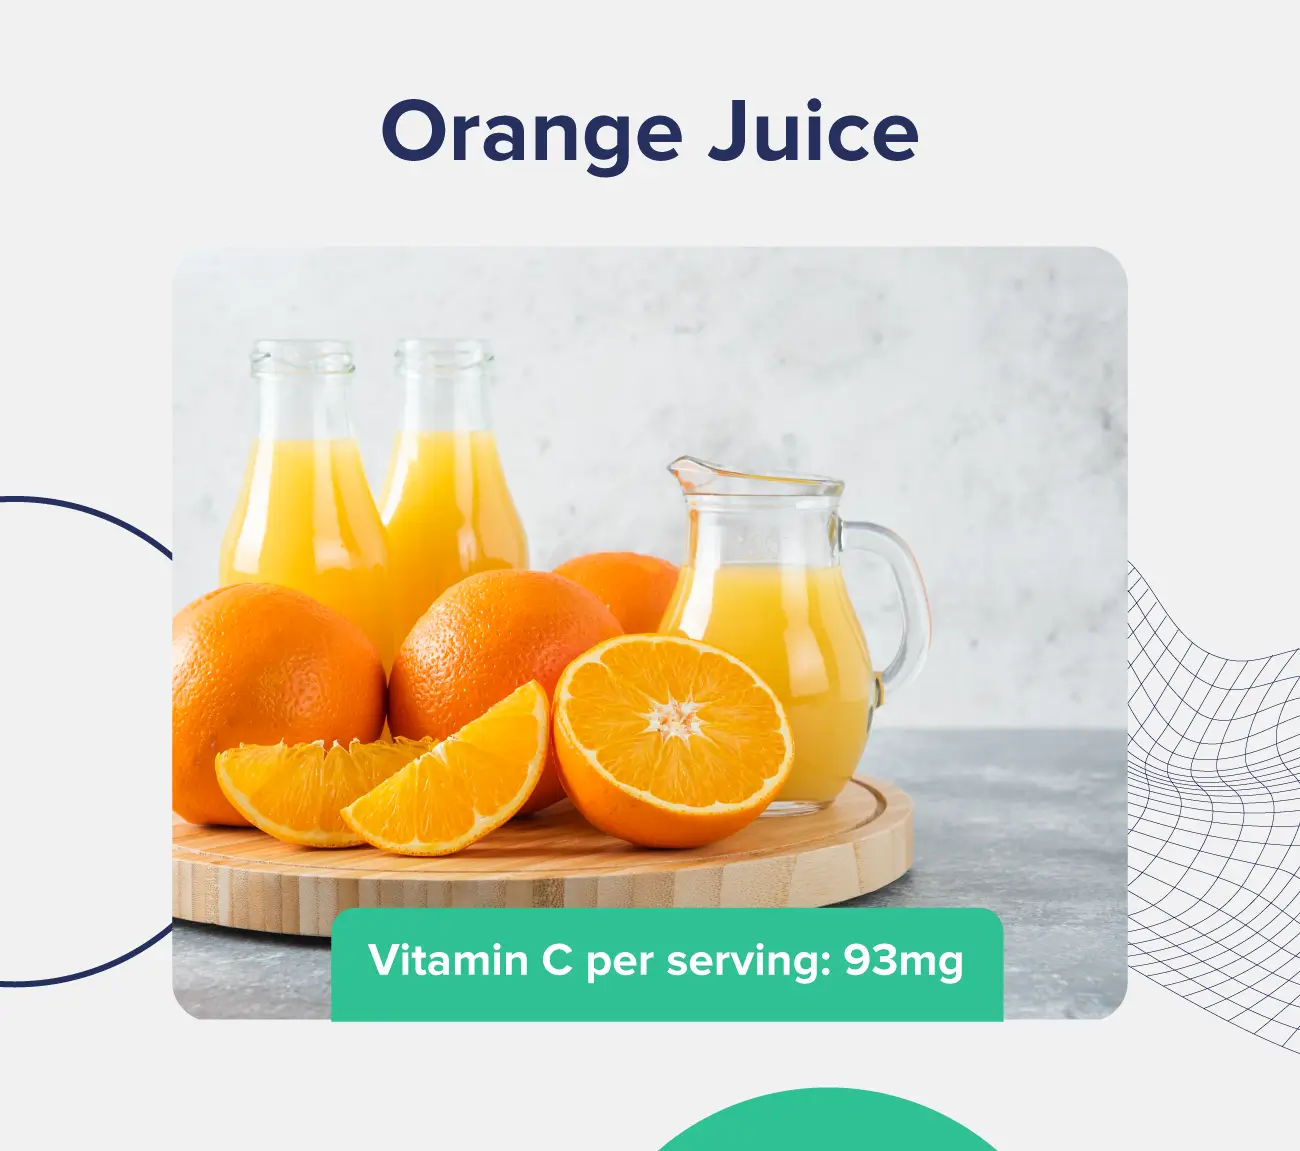 A graphic entitled "orange juice" depicting several pitchers of orange juice next to some sliced and whole oranges, also listing the vitamin C content (93 milligrams per serving).